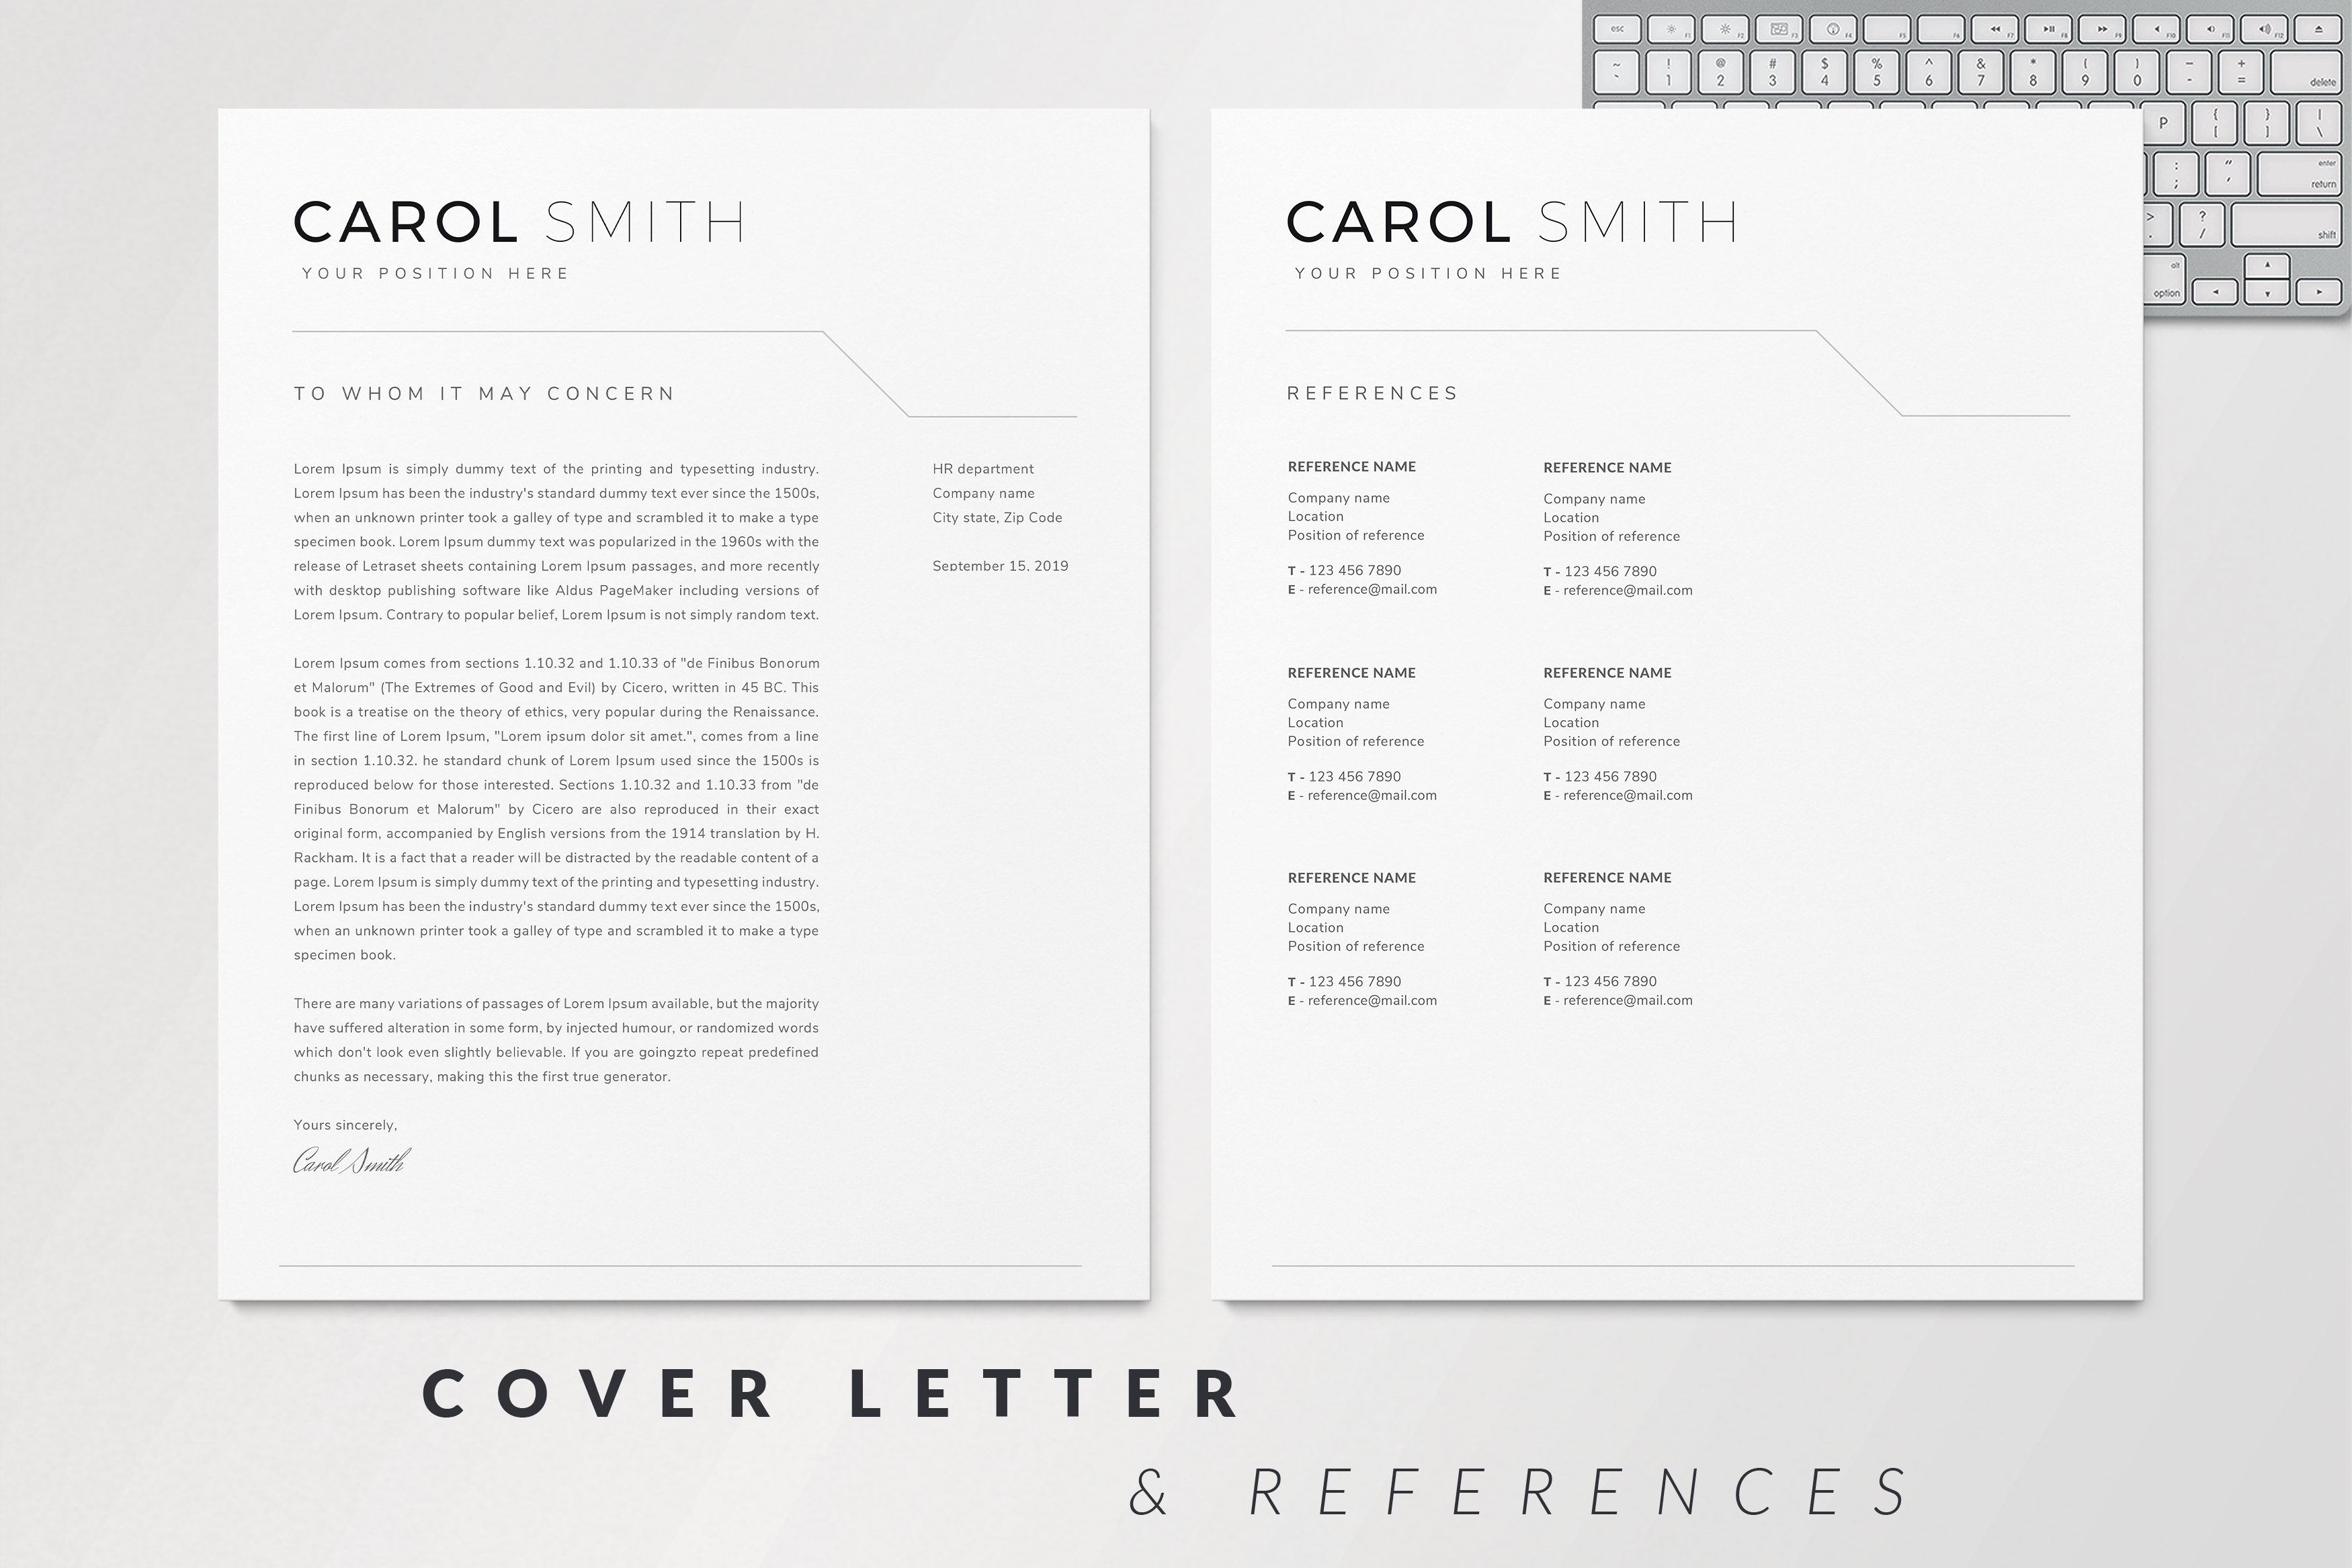 Cover letter and references for a resume.